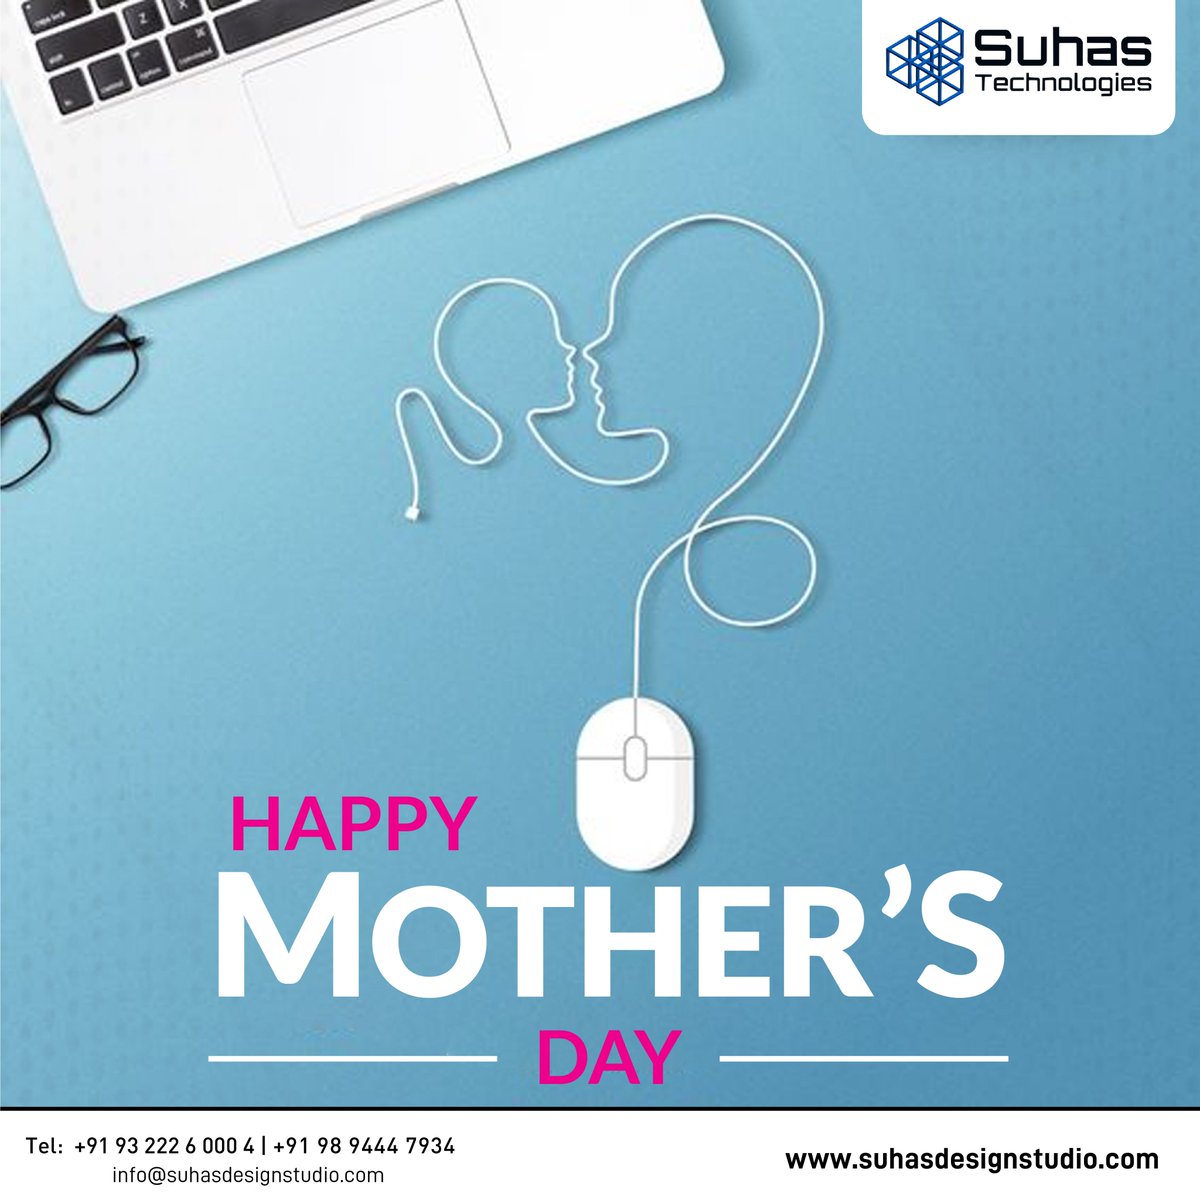 Celebrate Mother's Day with ease and style using Suhas Technologies' #HomeAutomation services! 🌸

Visit suhasdesignstudio.com 🌺🏡

💫#MothersDay #motherdaycelebration #HomeAutomation #Security #SuhasTechnologies #SmartHome #PeaceOfMind #SafeHome #SecureLiving 🏡